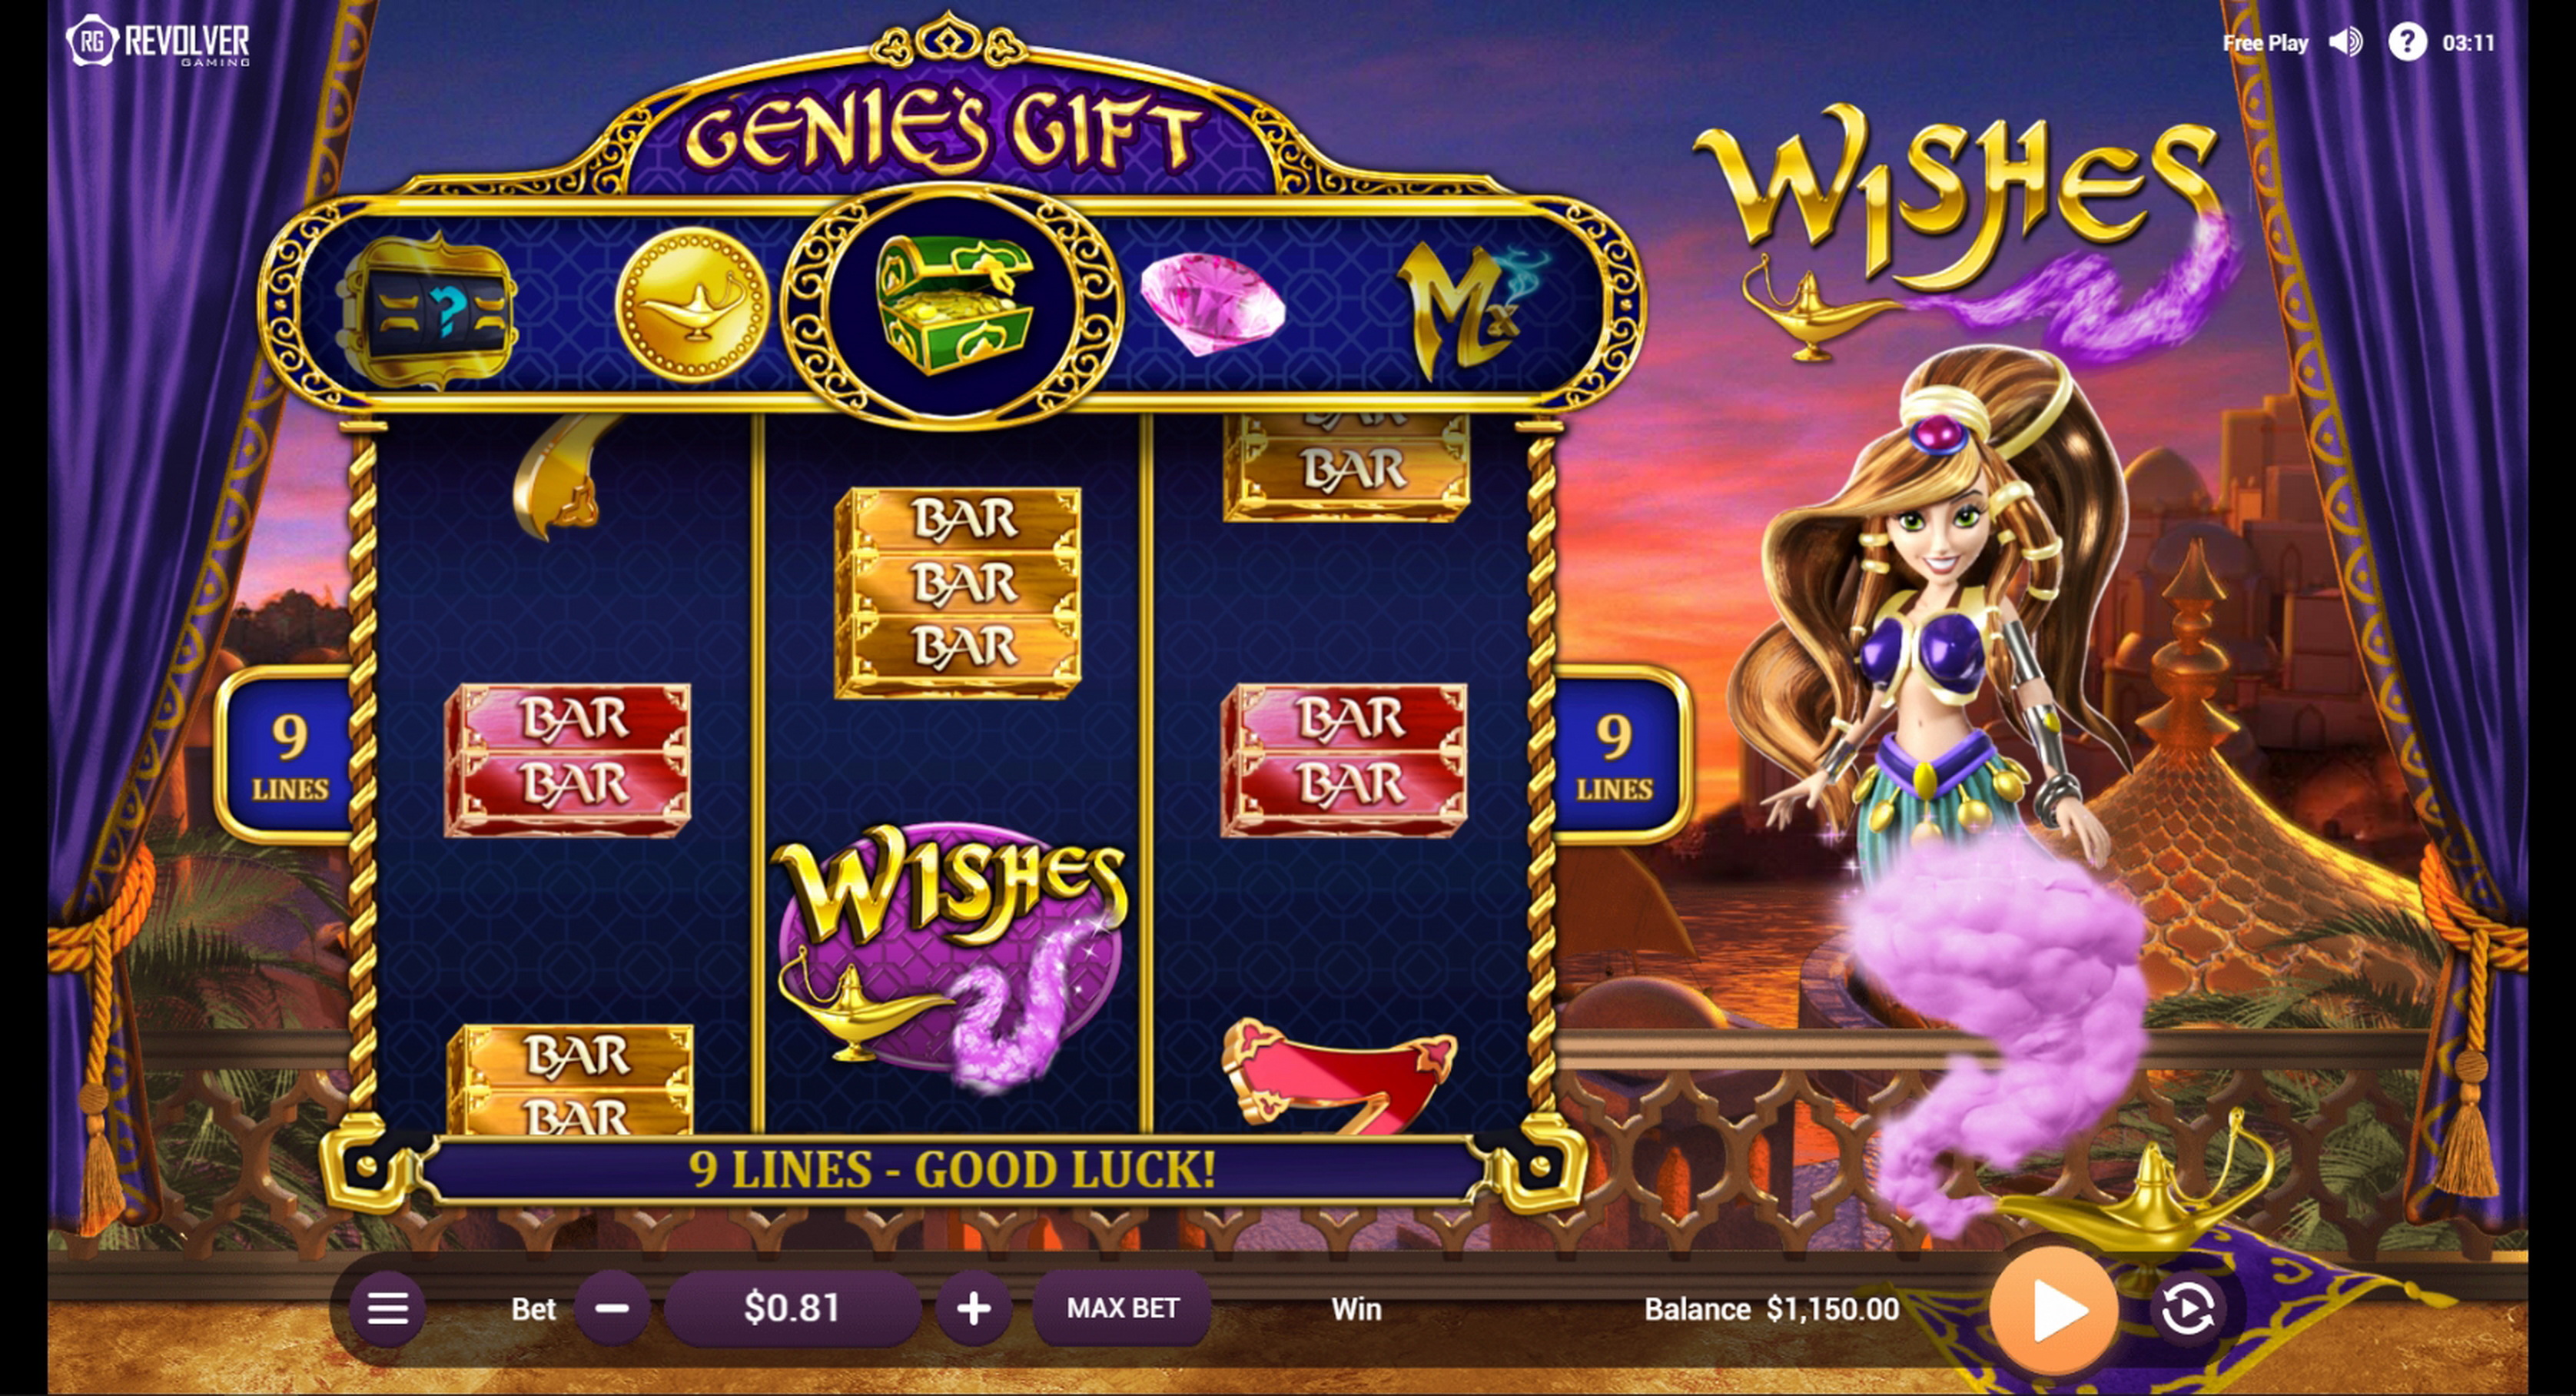 Reels in Wishes Slot Game by Revolver Gaming